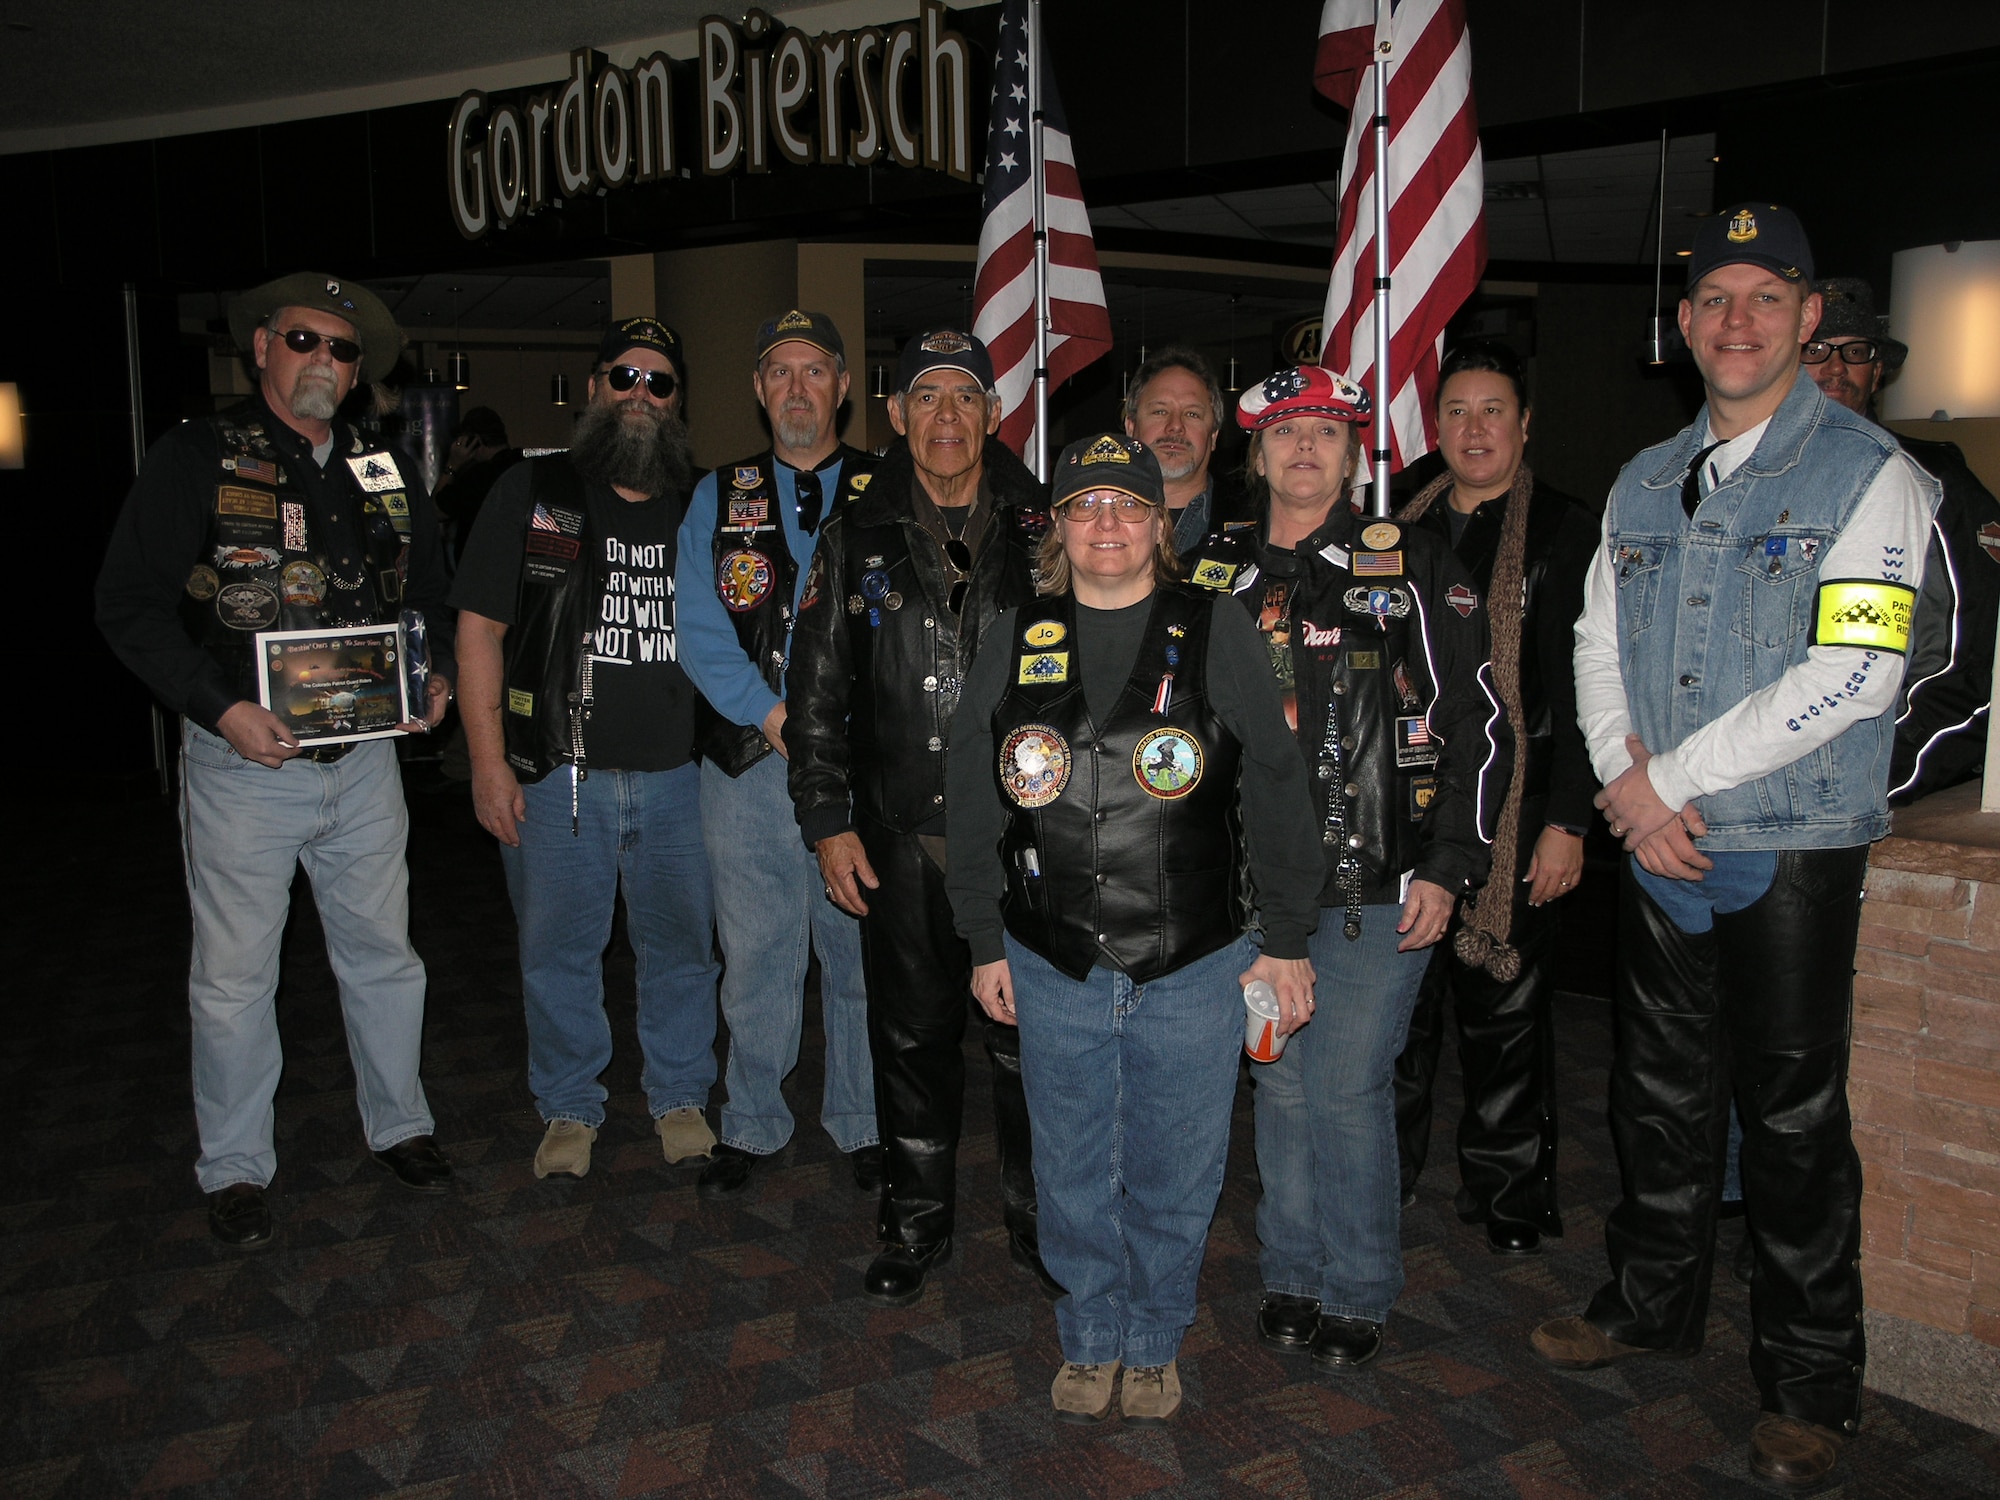 Members of the local Patriot Guard Riders pose for a photo Jan. 20 at the Colorado Springs Airport as they await returing members of the Air Force Reserve's 302nd Aeromedical Staging Squadron from a six-month deployment to Iraq. The PGR, which boasts its support for each deployment of military members in the Pikes Peak area, was established in August 2005 as a deterrent to protesters who disrupted military funerals because of their differing views and opposition to combat operations in Iraq and Afghanistan. (U.S. Air Force photo/Tech. Sgt. David D. Morton)